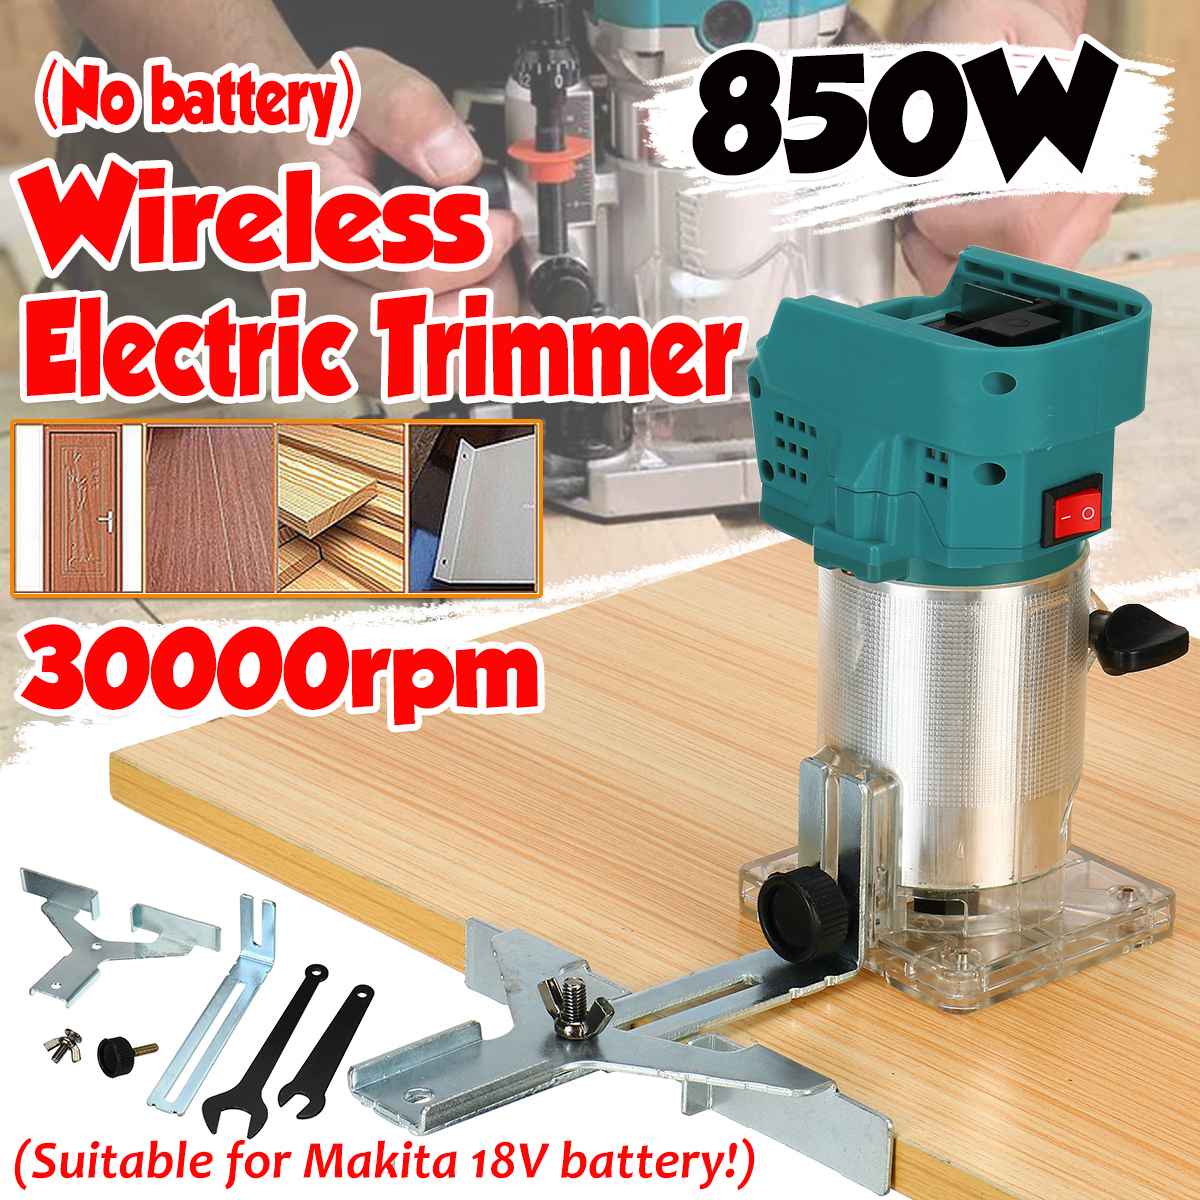 Cordless Electric Trimmer Wood hand trimmer Engraving Slotting Trimming Carving Machine Router Wood 850W for Makita 18V battery